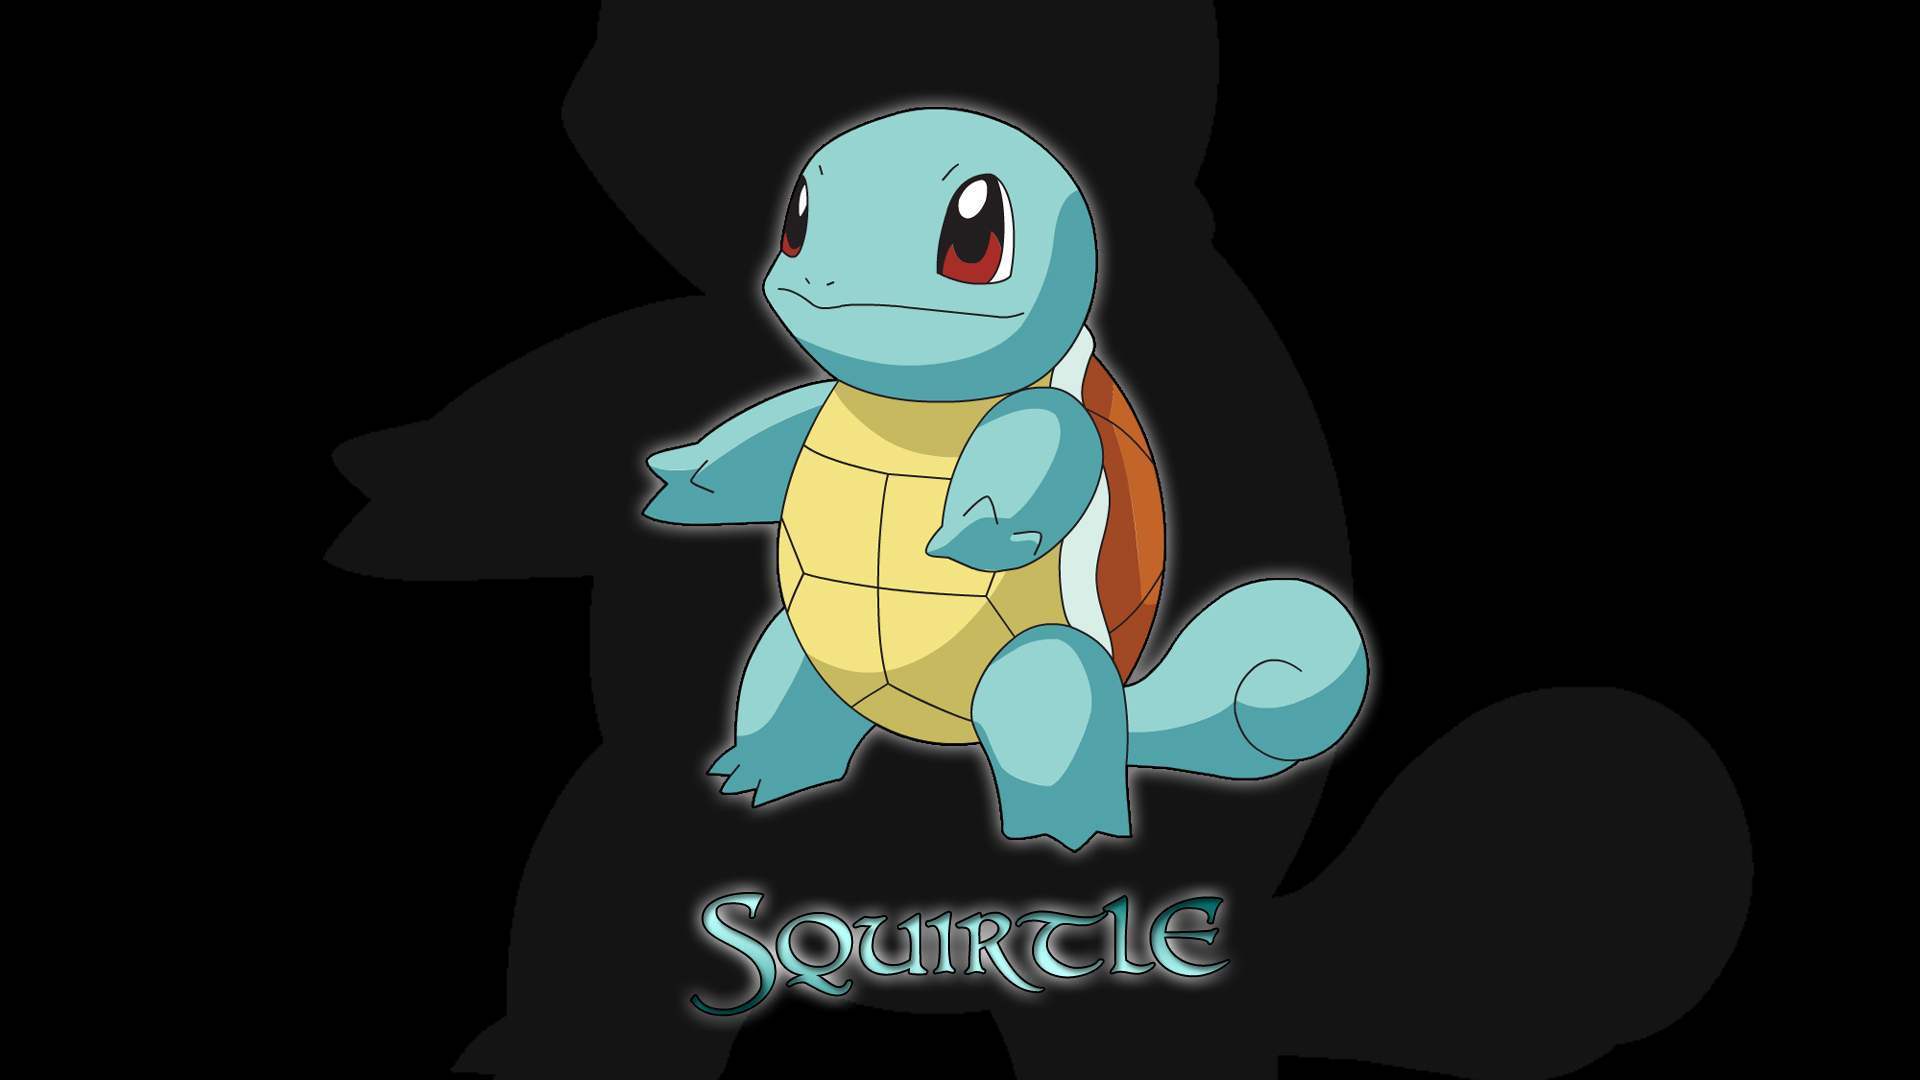 Squirtle - Moving Wallpaper Of Pokemon - HD Wallpaper 